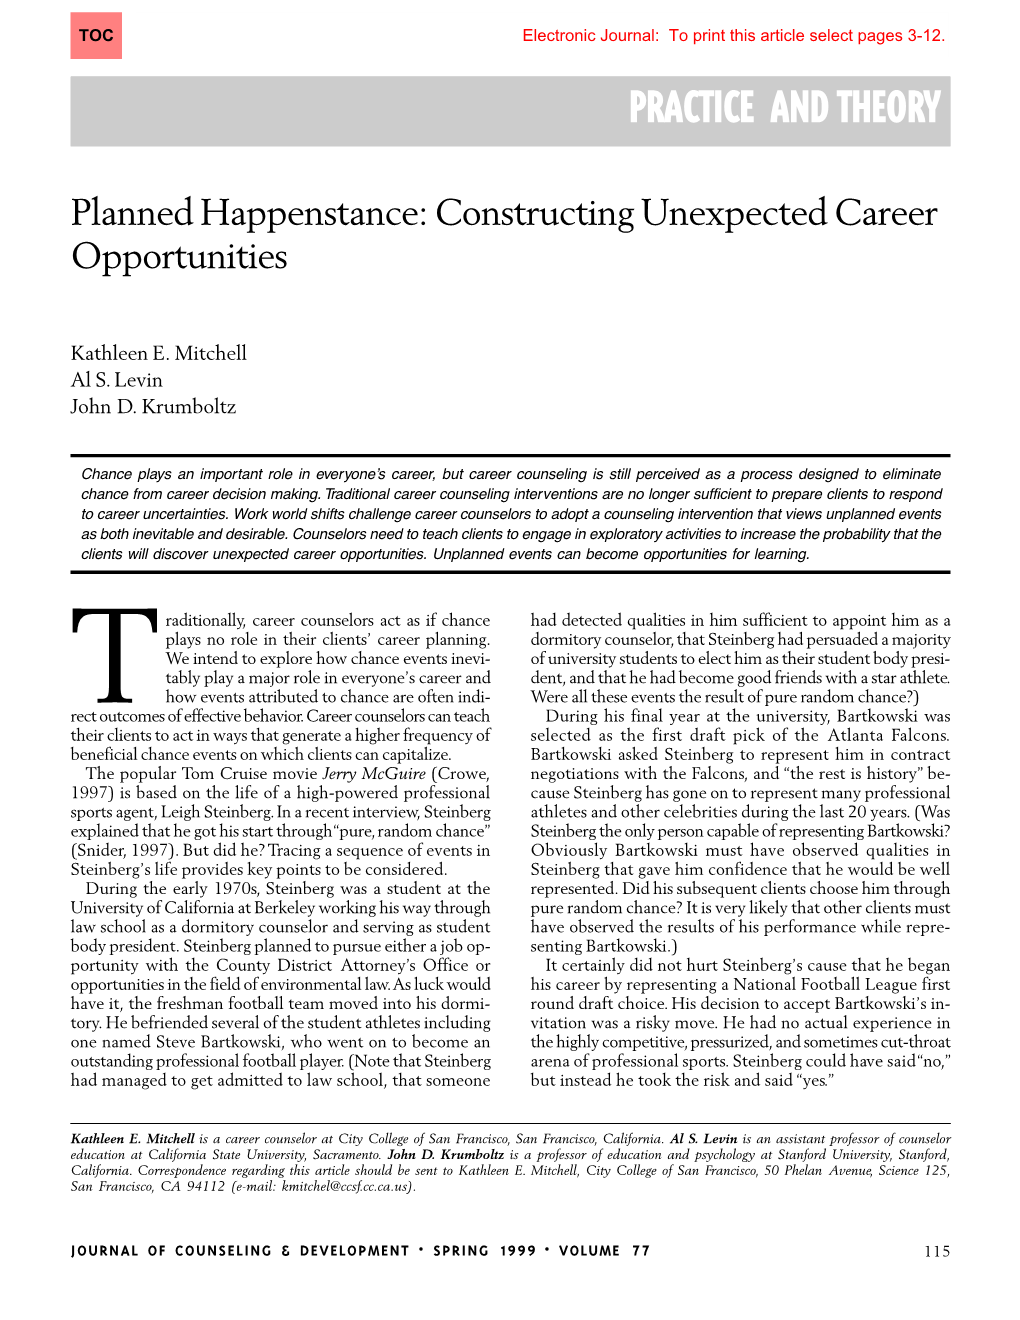 Planned Happenstance: Constructing Unexpected Career Opportunities